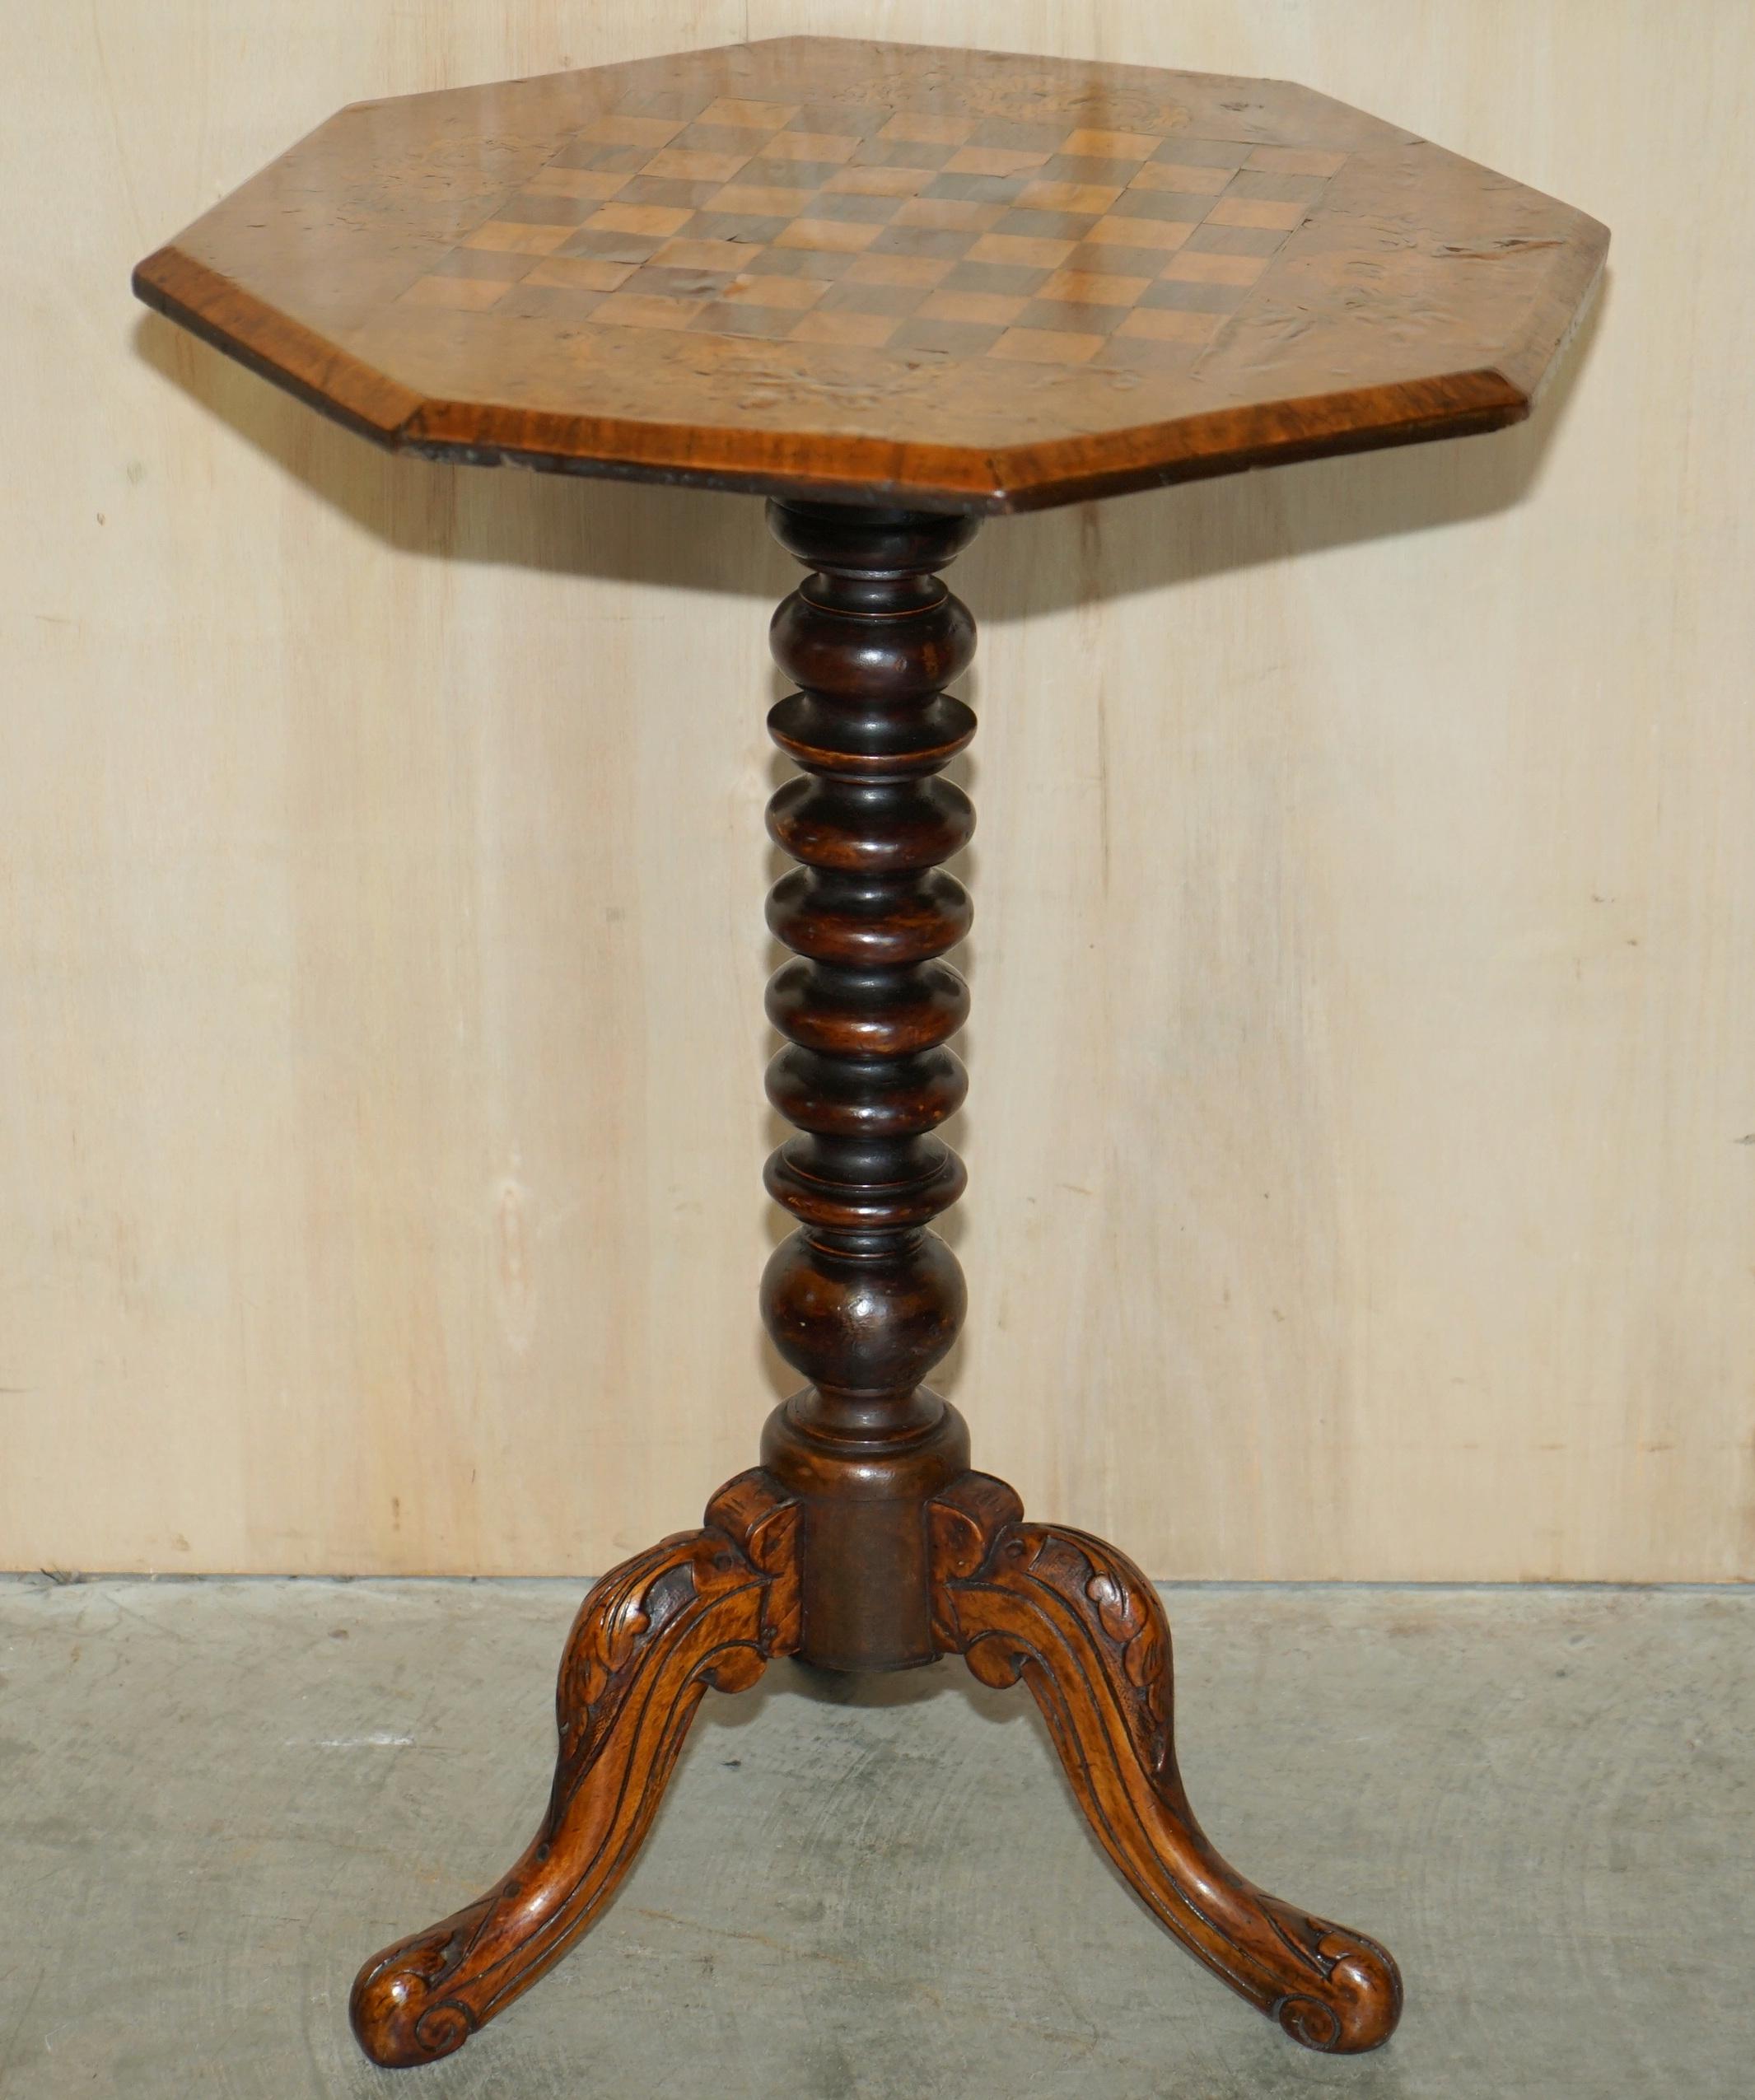 Antique Victorian Carved Walnut & Hardwood Marquetry Inlaid Chess Games Table For Sale 8